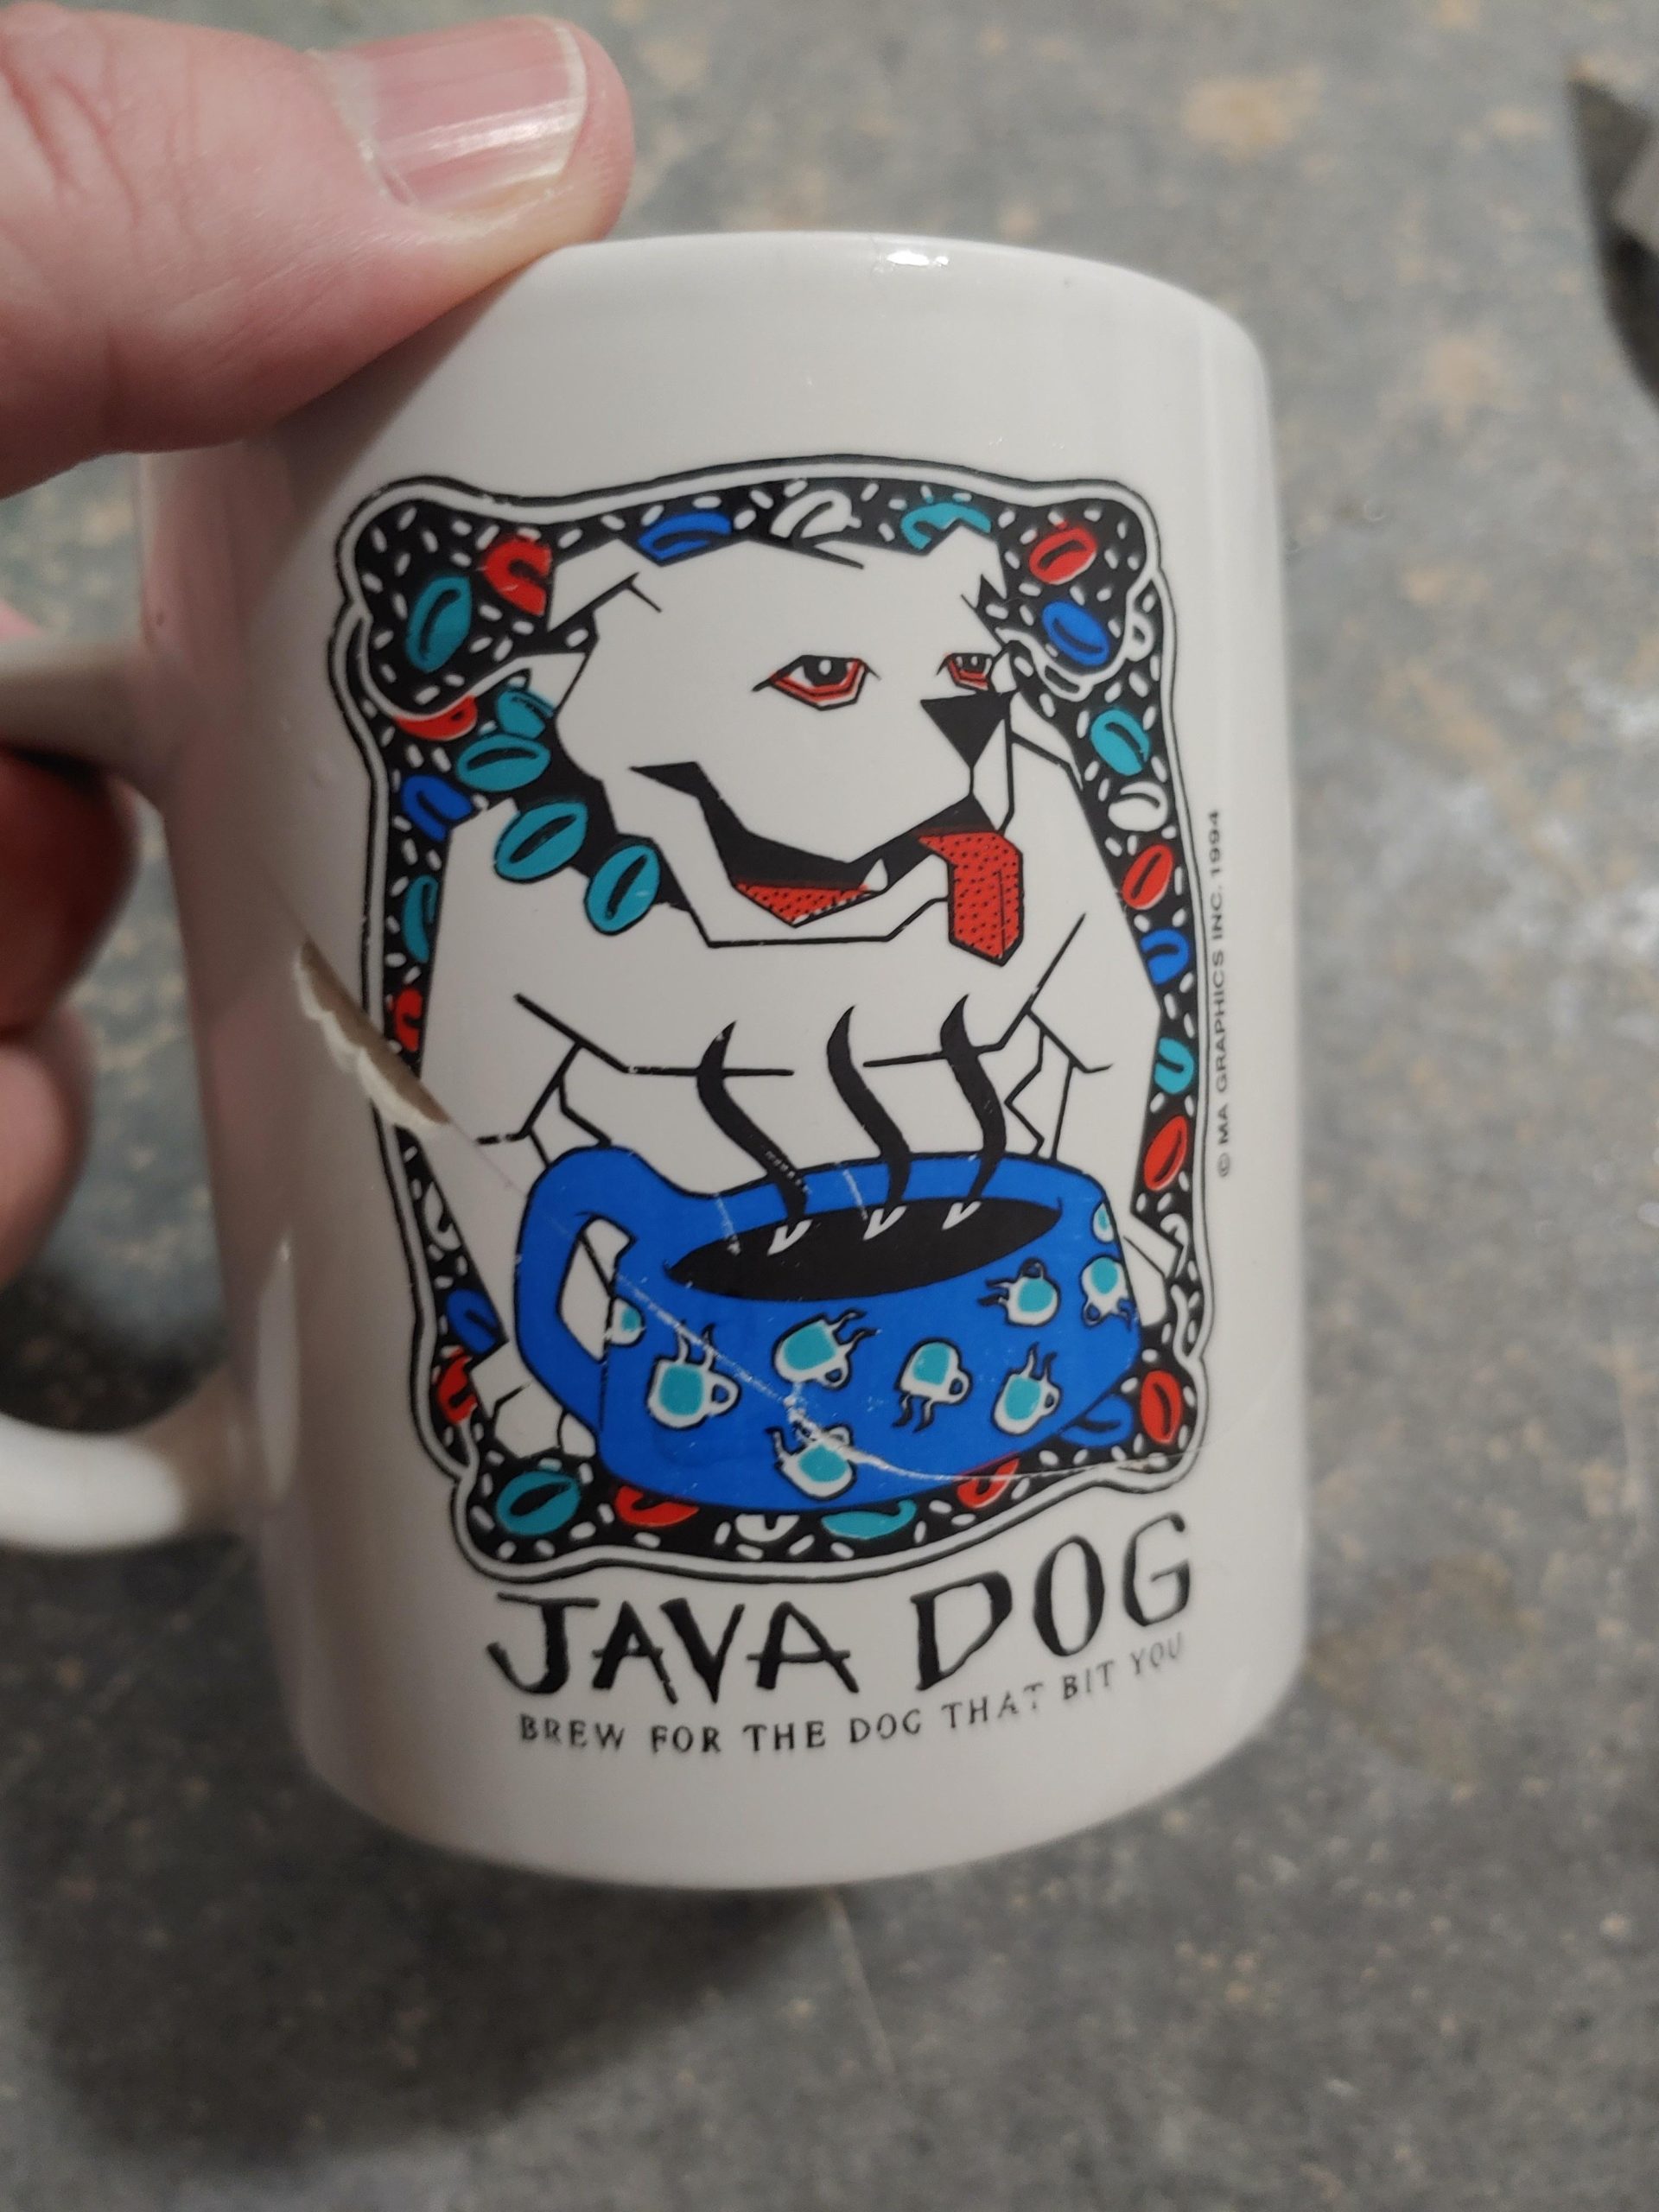 R.I.P.  Java Dogs